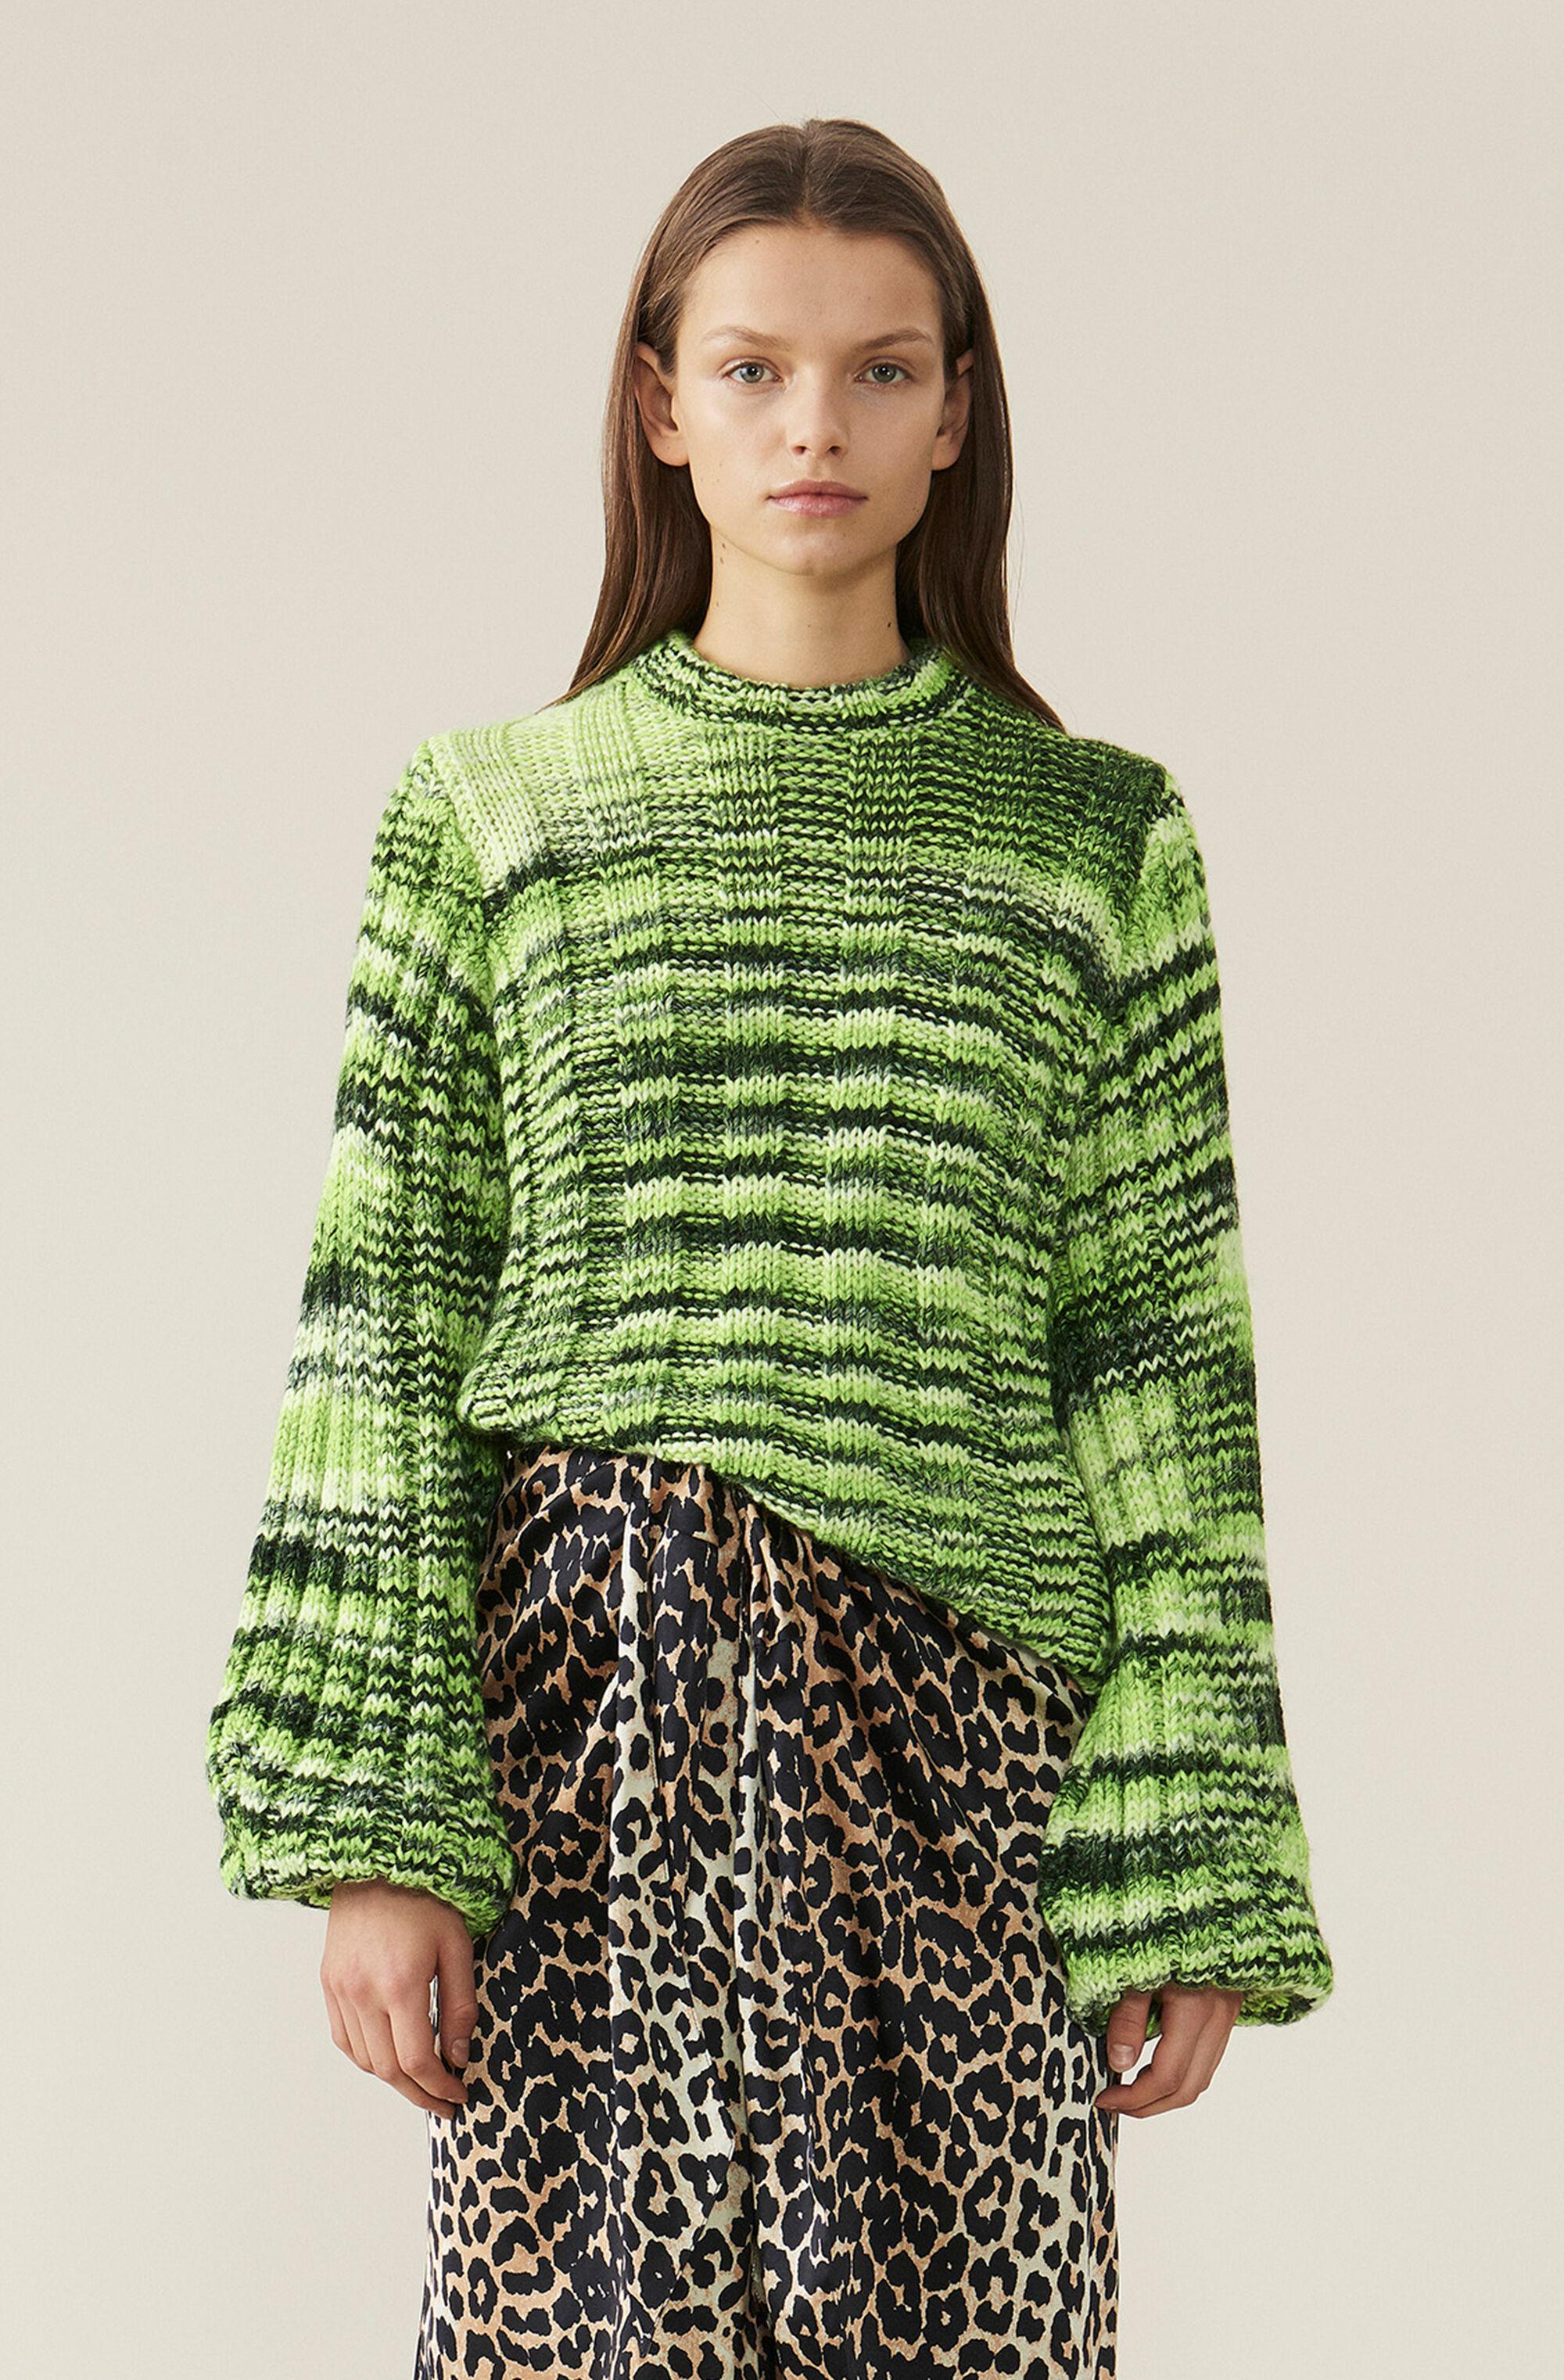 Ganni Synthetic Balloon-sleeve Melange Sweater in Green - Save 65% - Lyst